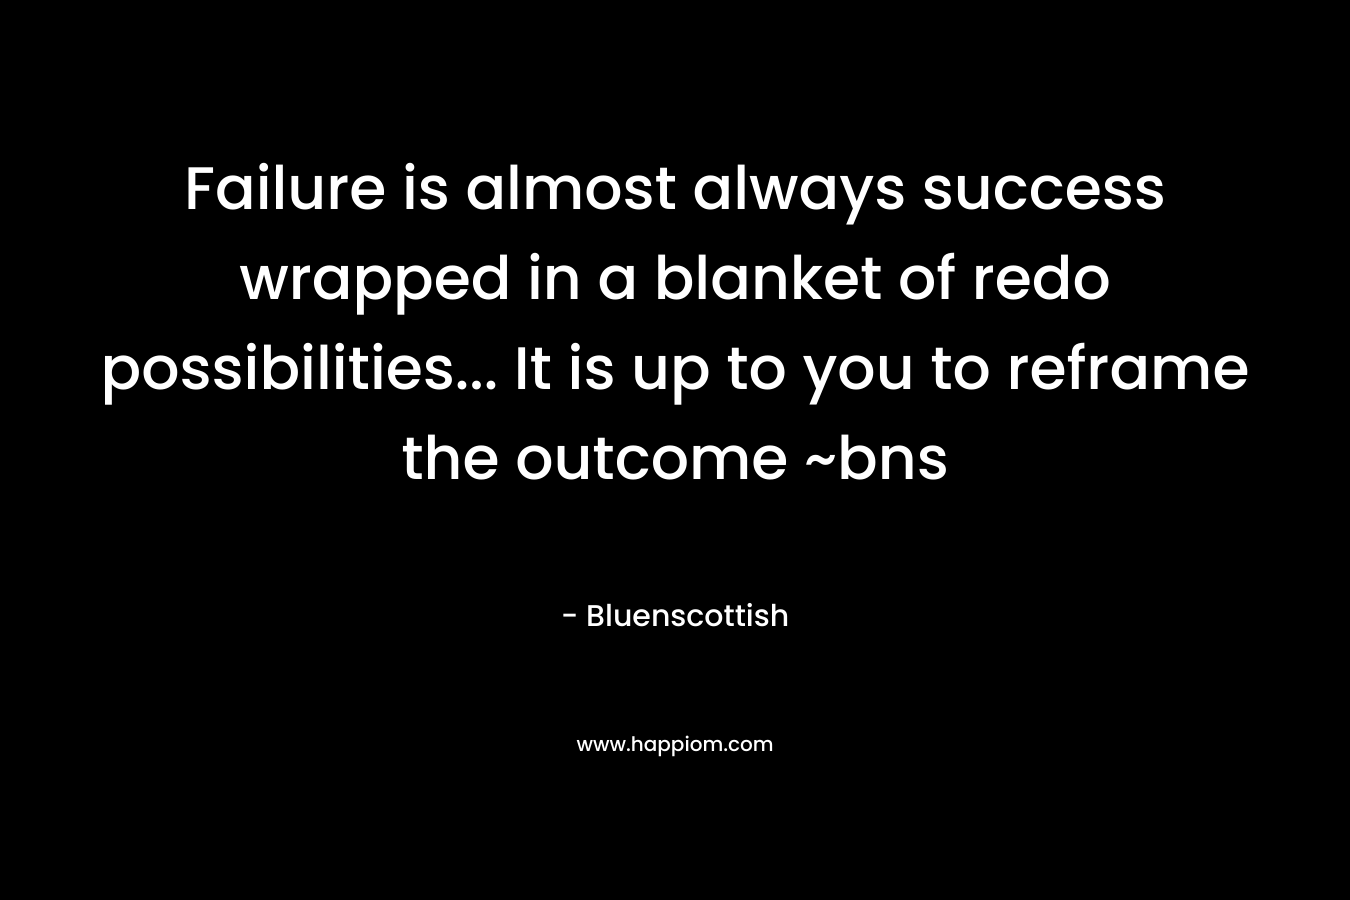 Failure is almost always success wrapped in a blanket of redo possibilities... It is up to you to reframe the outcome ~bns